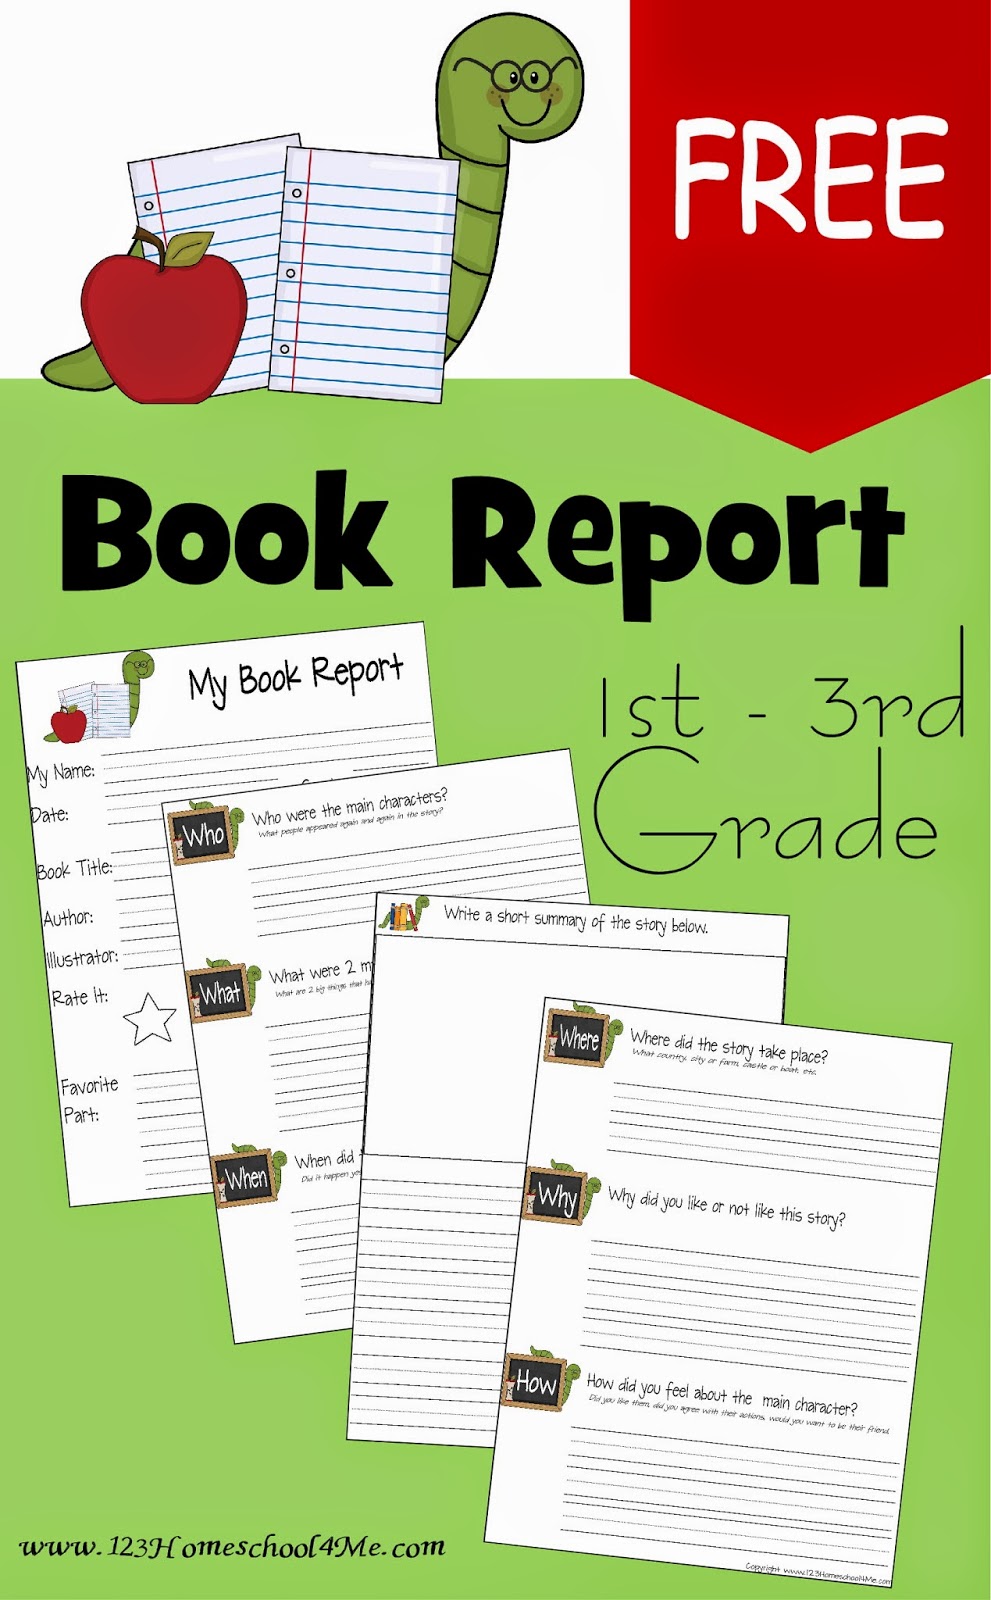 Cool book report poster ideas